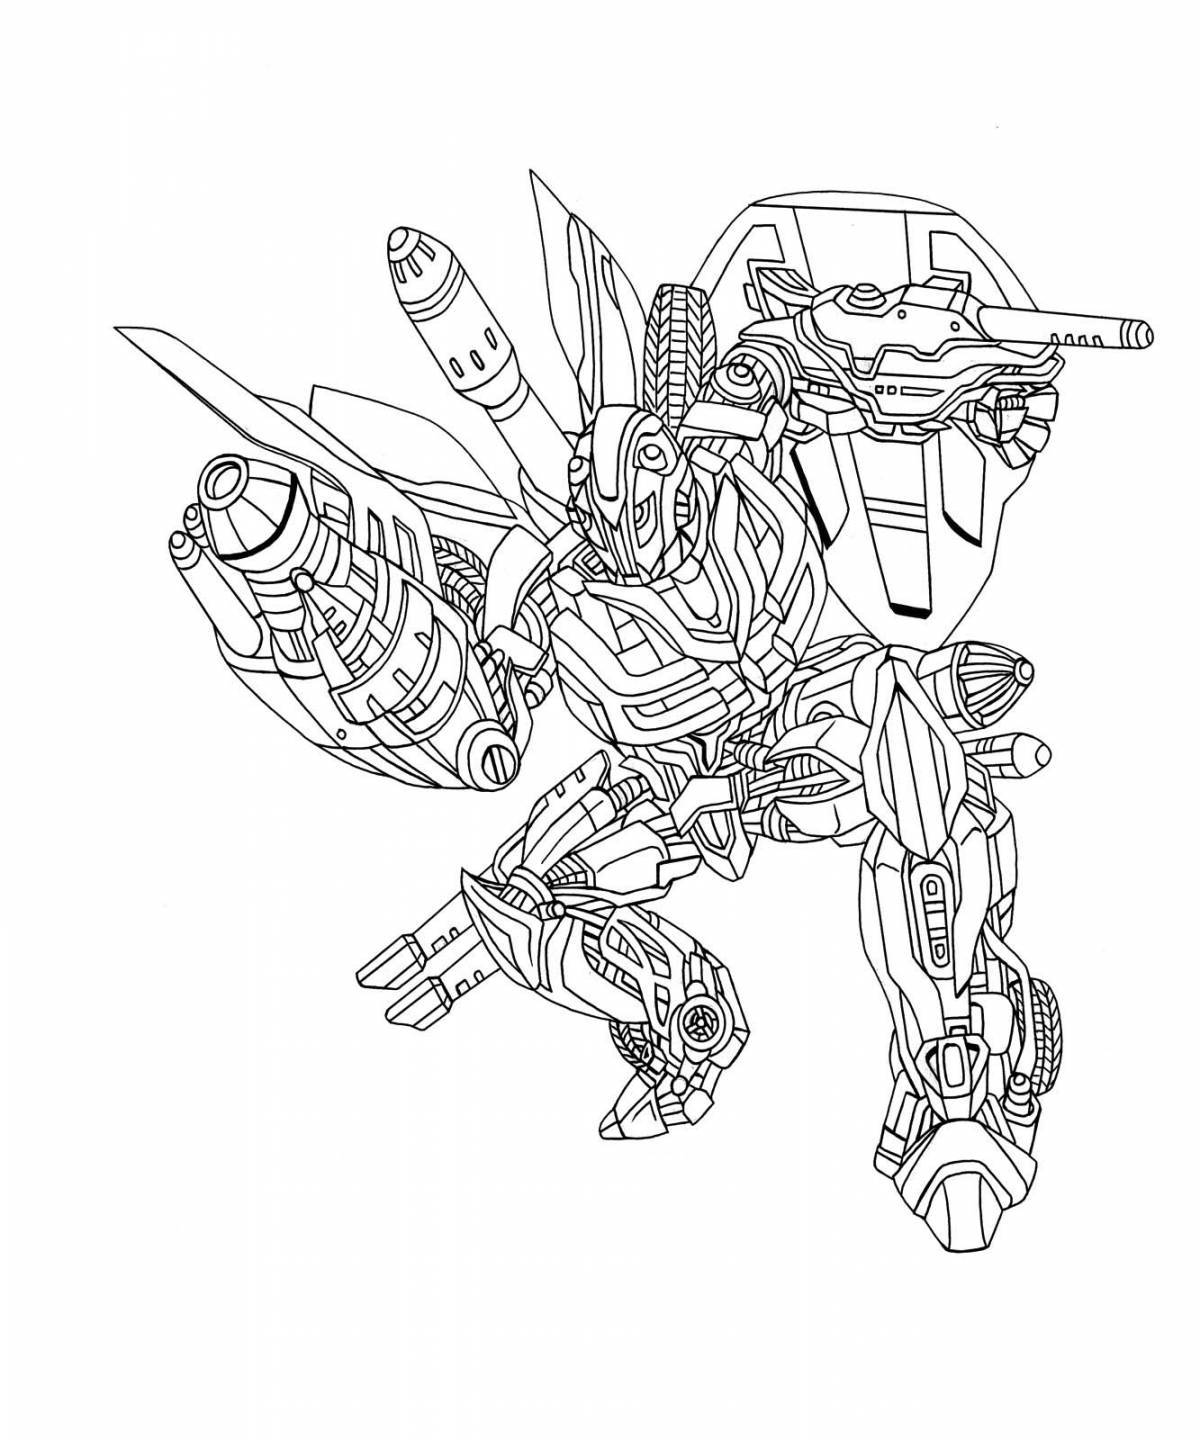 Sweet bumblebee coloring pages for kids